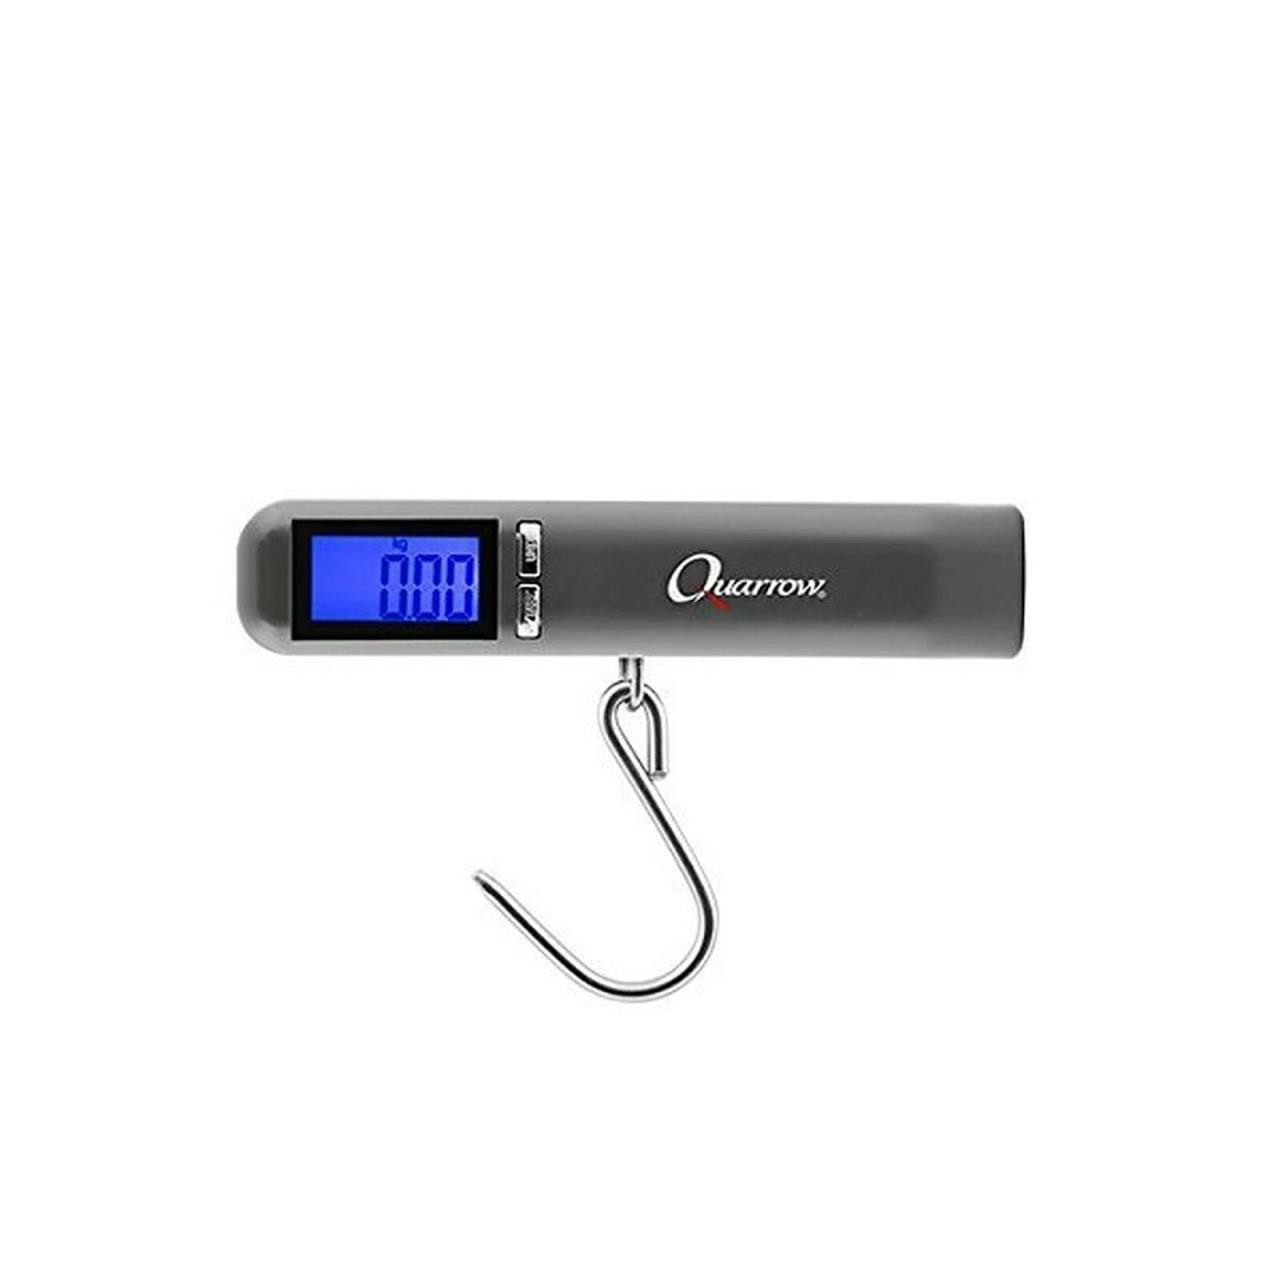 Nebo Quarrow Digital Fish Scale - Yeager's Sporting Goods